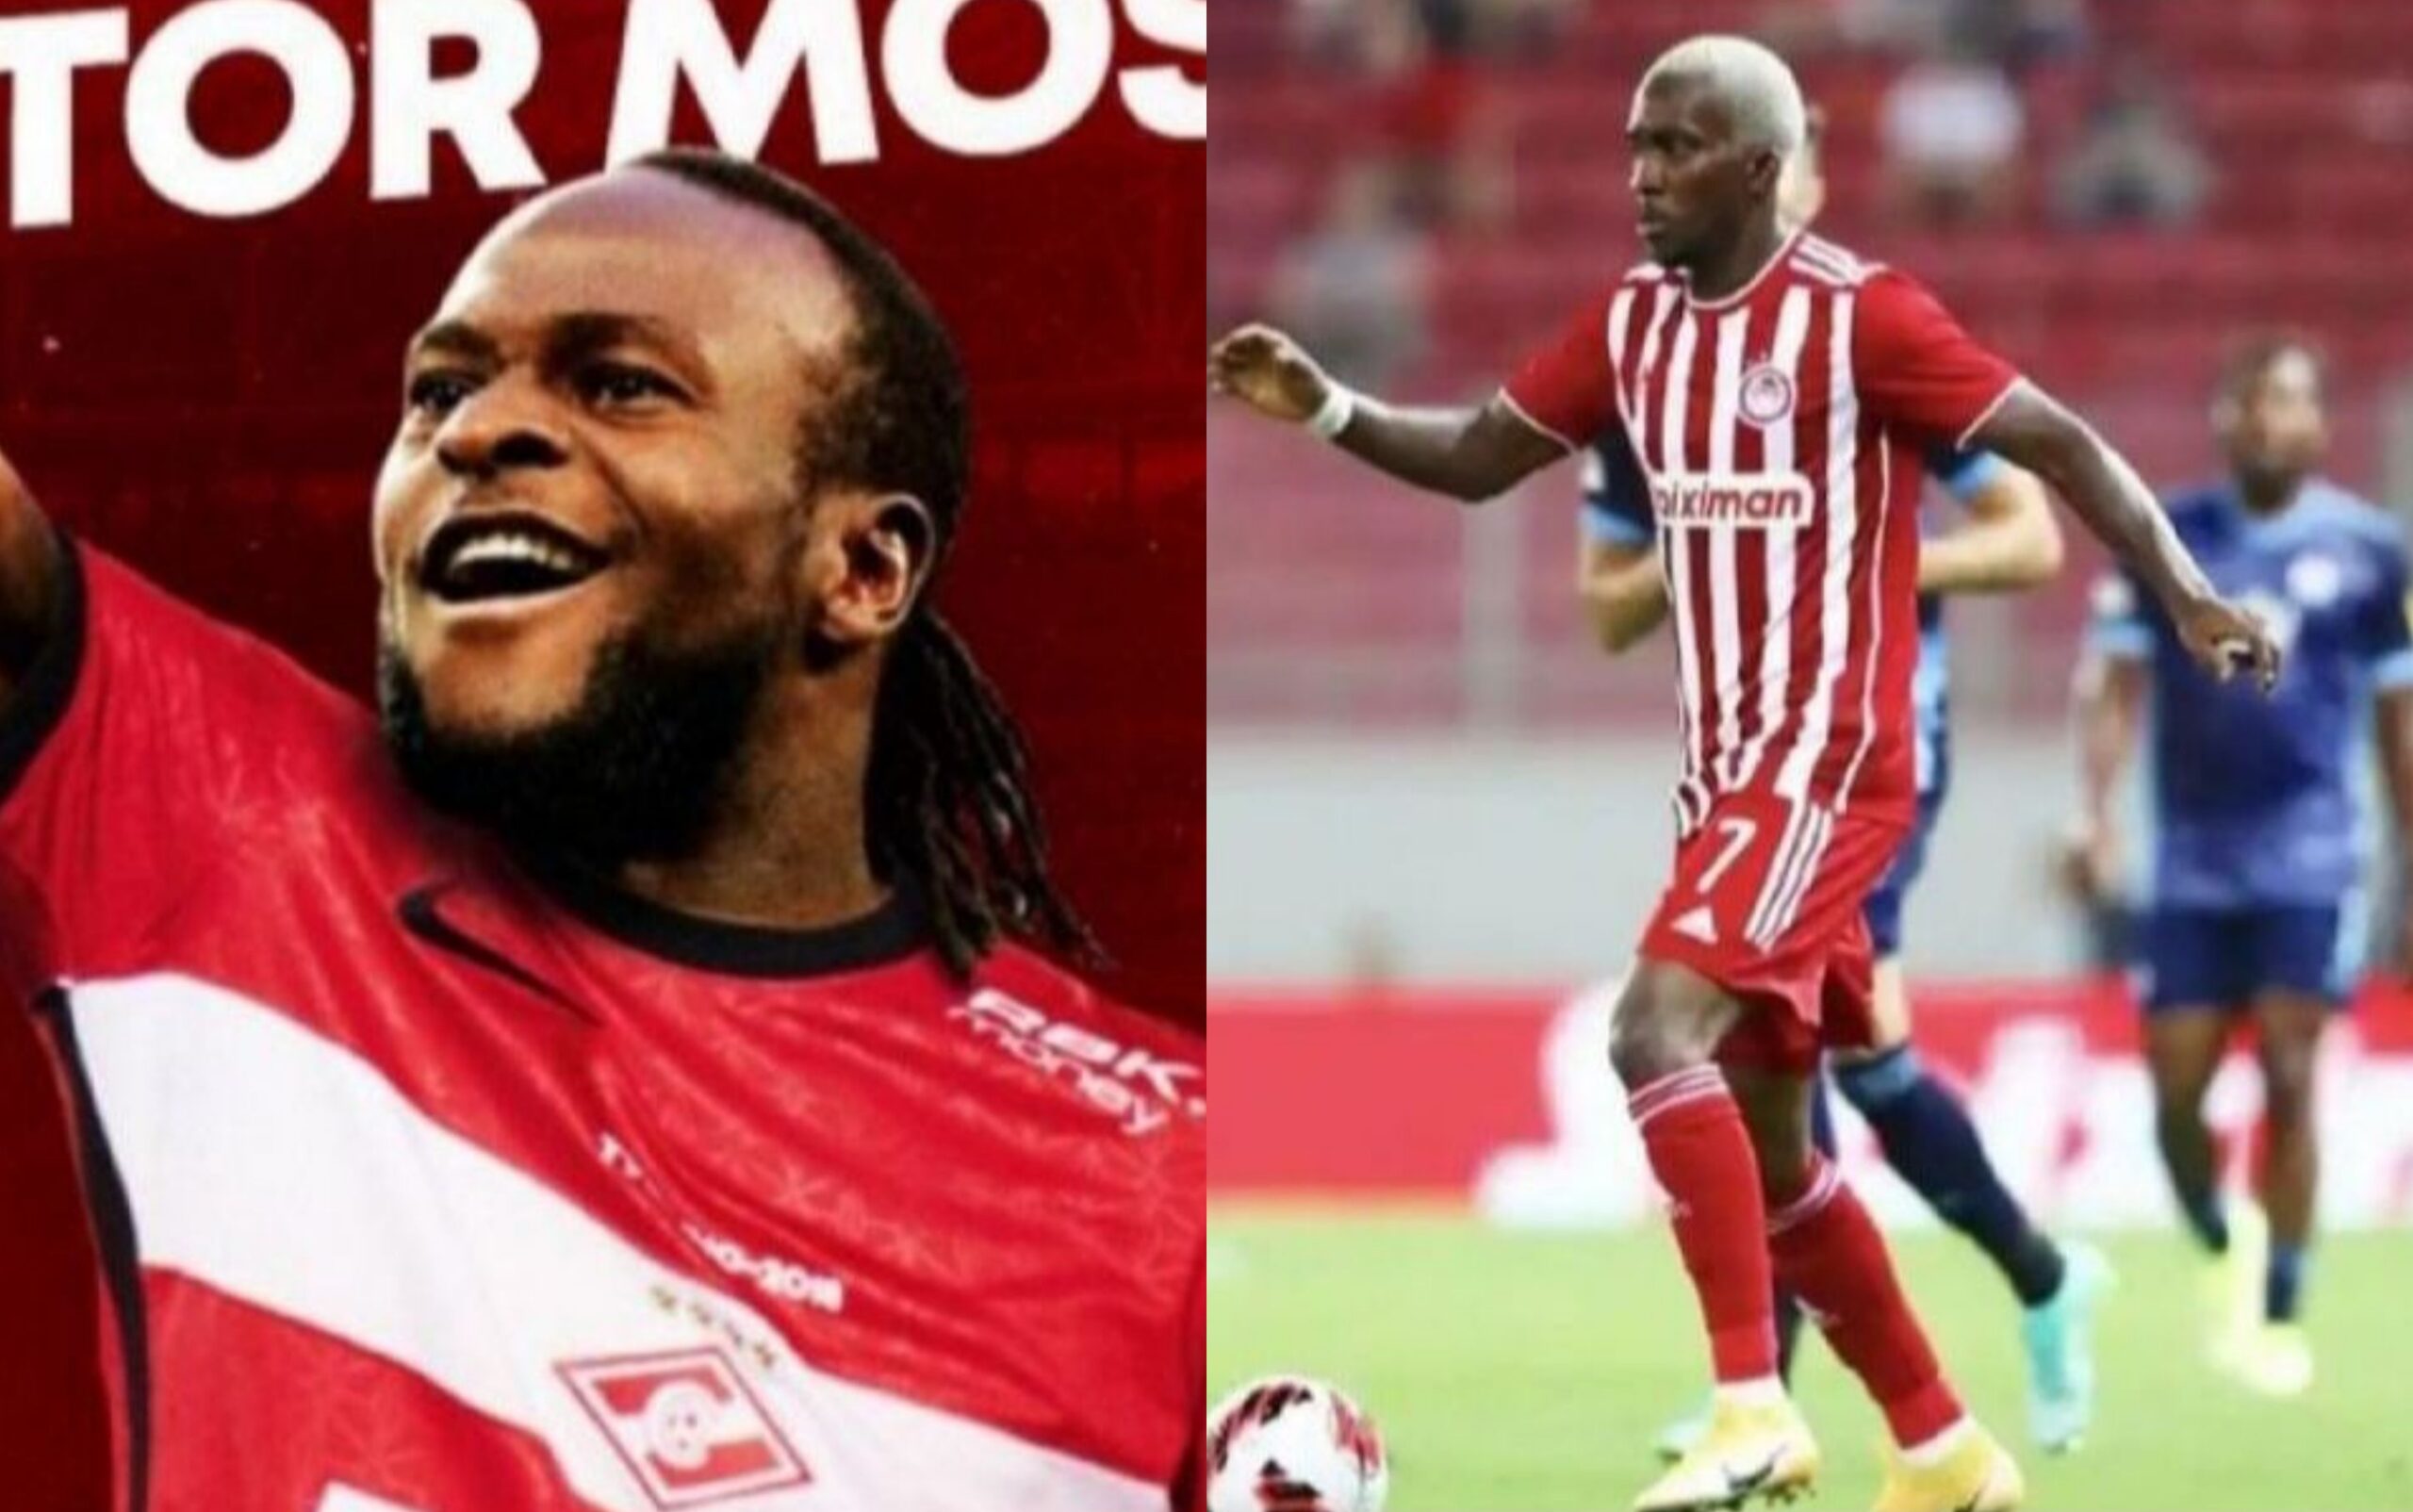 Victor Moses on target in Spartak Moscow's league opener - Latest